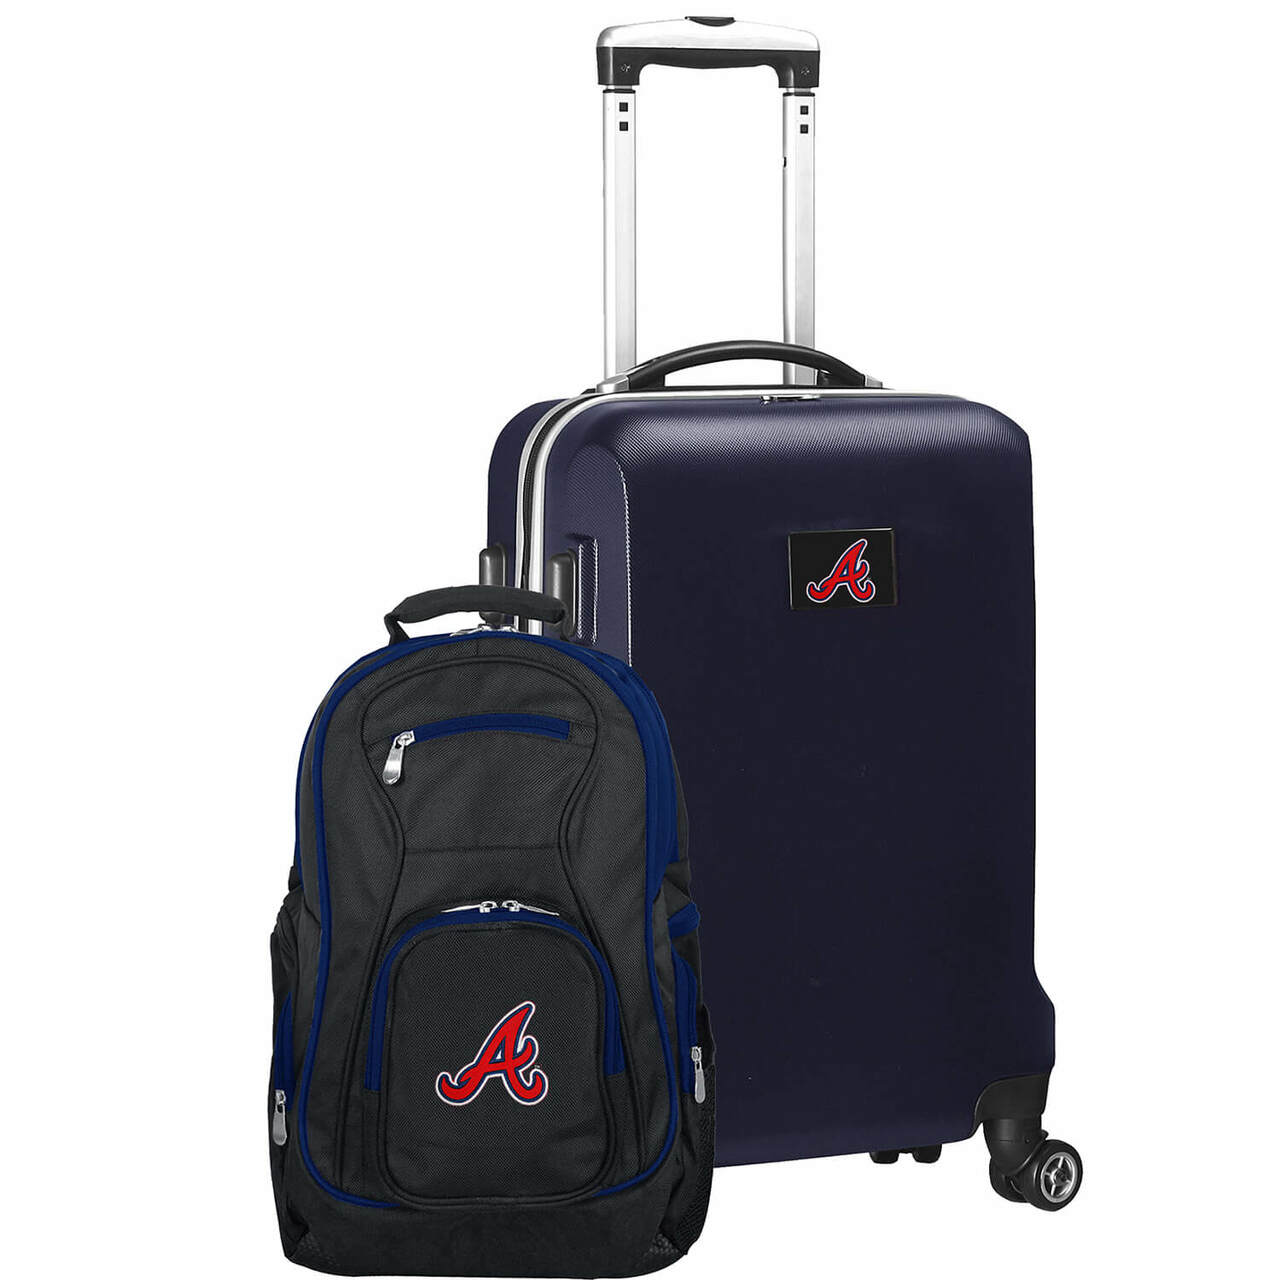 Atlanta Braves Deluxe 2-Piece Backpack and Carry on Set in Navy